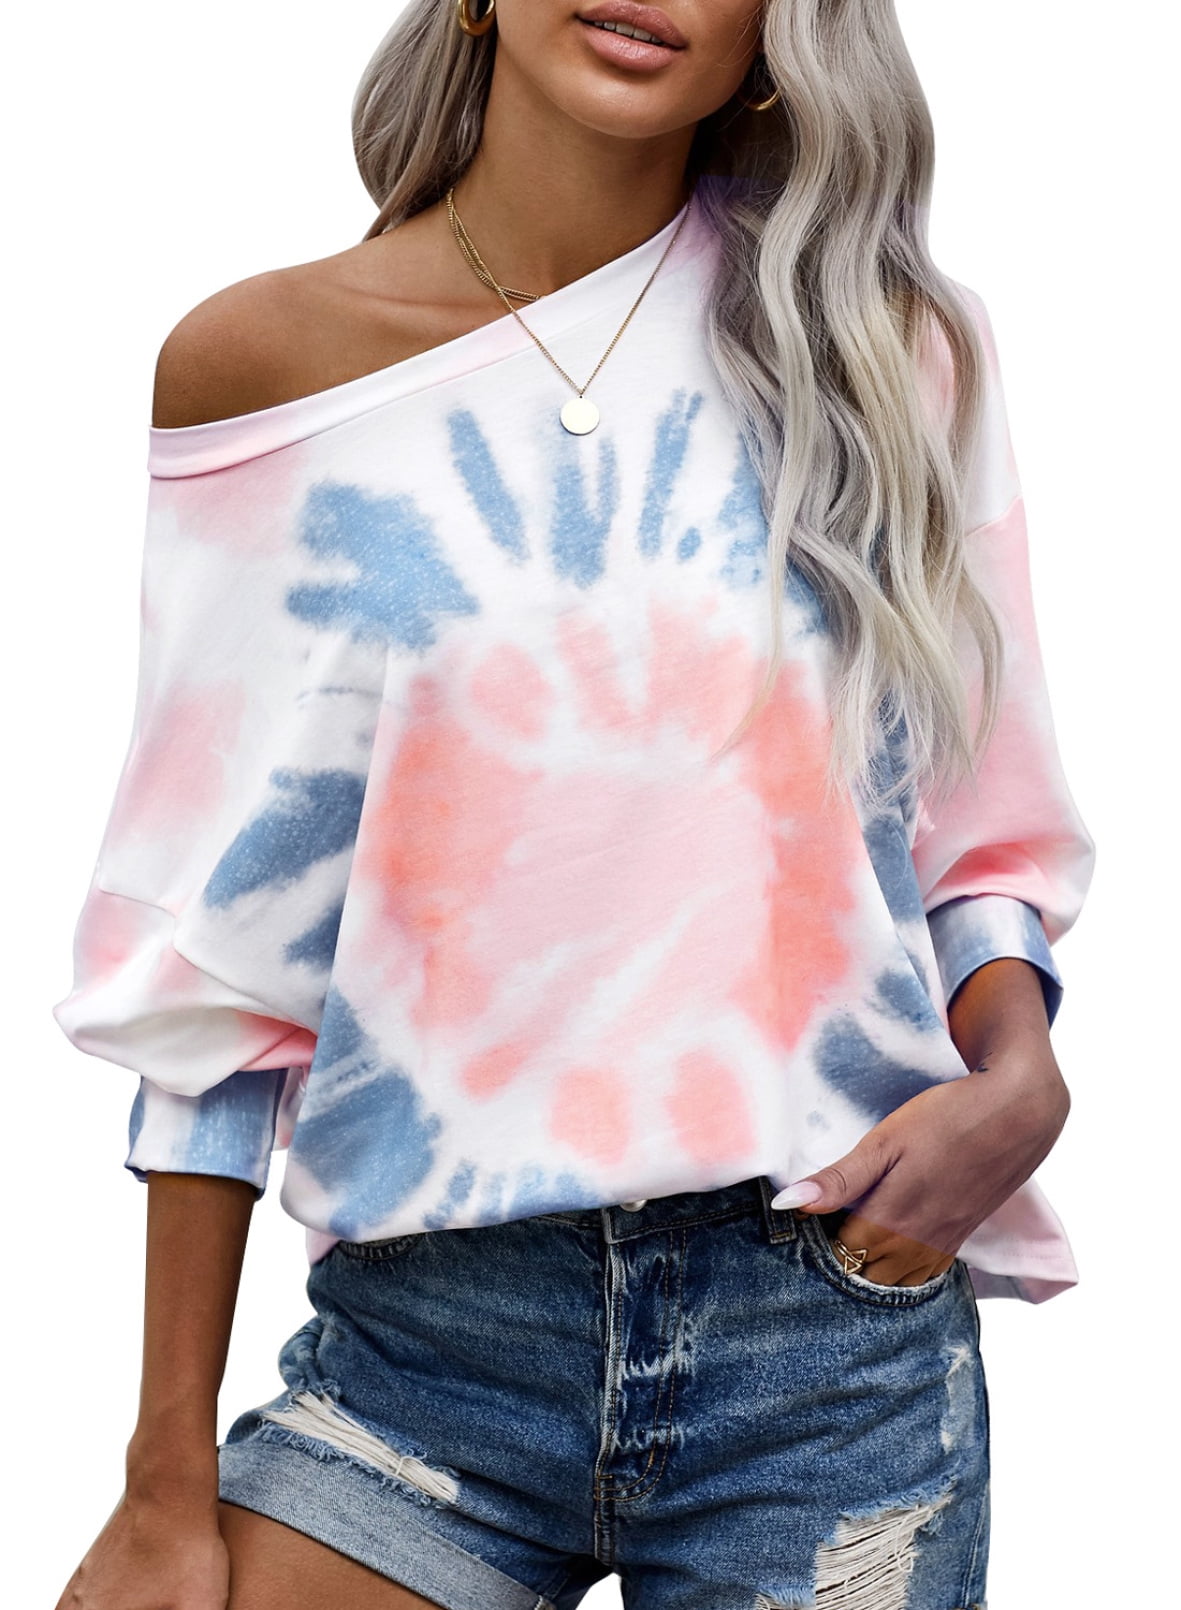 Womens Casual Crewneck Tie Dye Sweatshirt Striped Printed Loose Soft Long Sleeve Pullover Tunic Tops Shirts Plus Size